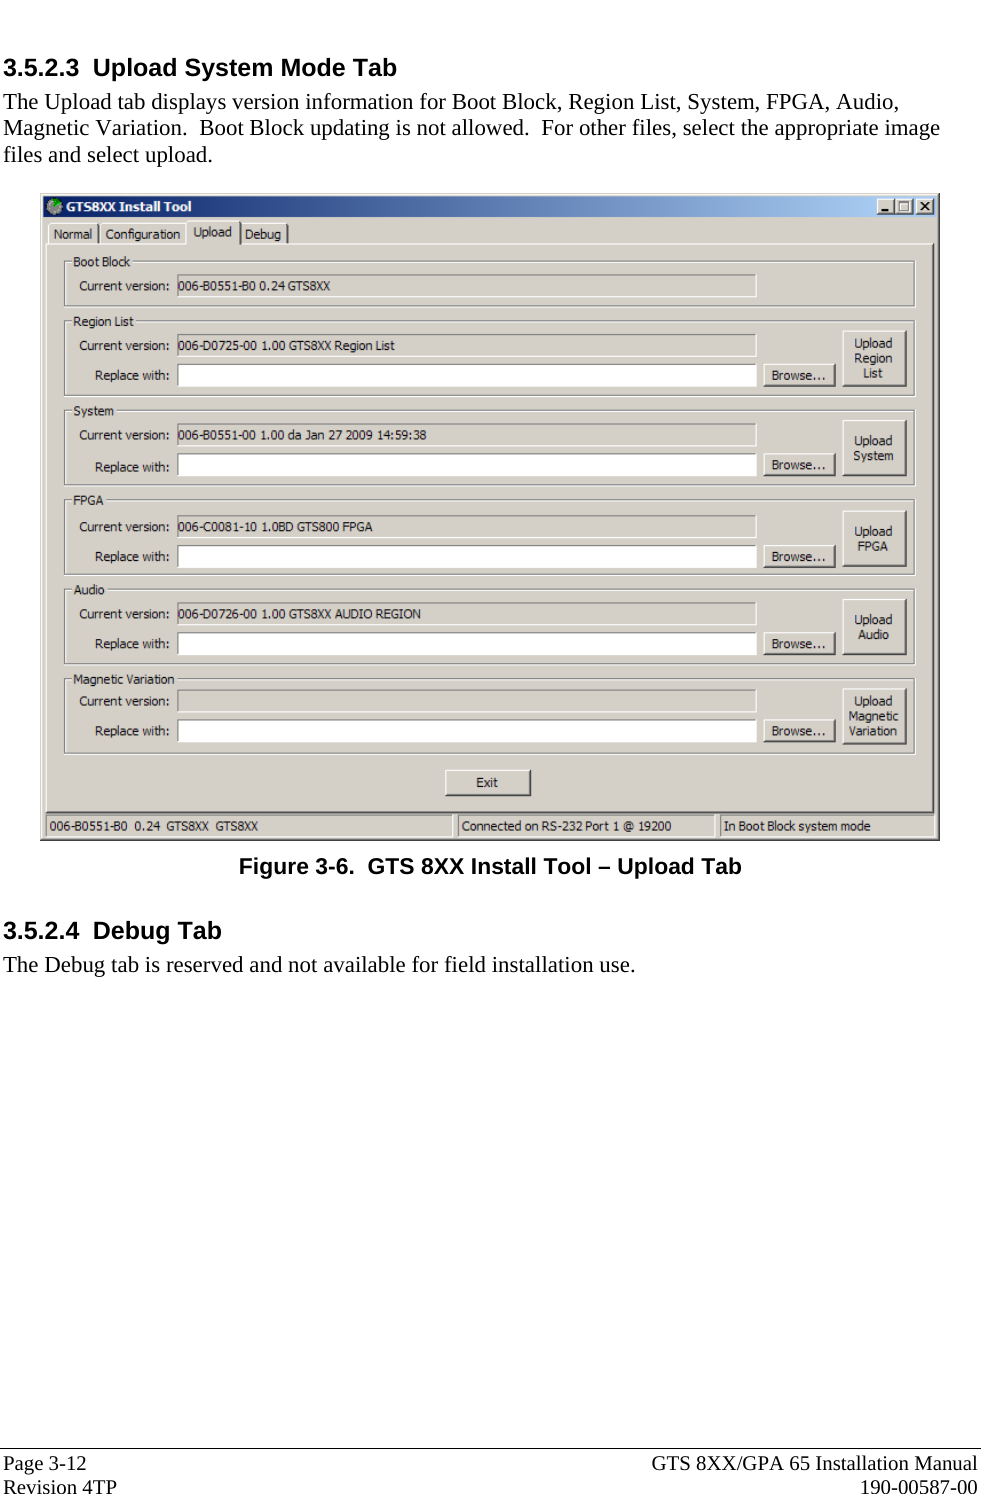  Page 3-12  GTS 8XX/GPA 65 Installation Manual Revision 4TP  190-00587-00 3.5.2.3  Upload System Mode Tab The Upload tab displays version information for Boot Block, Region List, System, FPGA, Audio, Magnetic Variation.  Boot Block updating is not allowed.  For other files, select the appropriate image files and select upload.   Figure 3-6.  GTS 8XX Install Tool – Upload Tab 3.5.2.4 Debug Tab The Debug tab is reserved and not available for field installation use. 